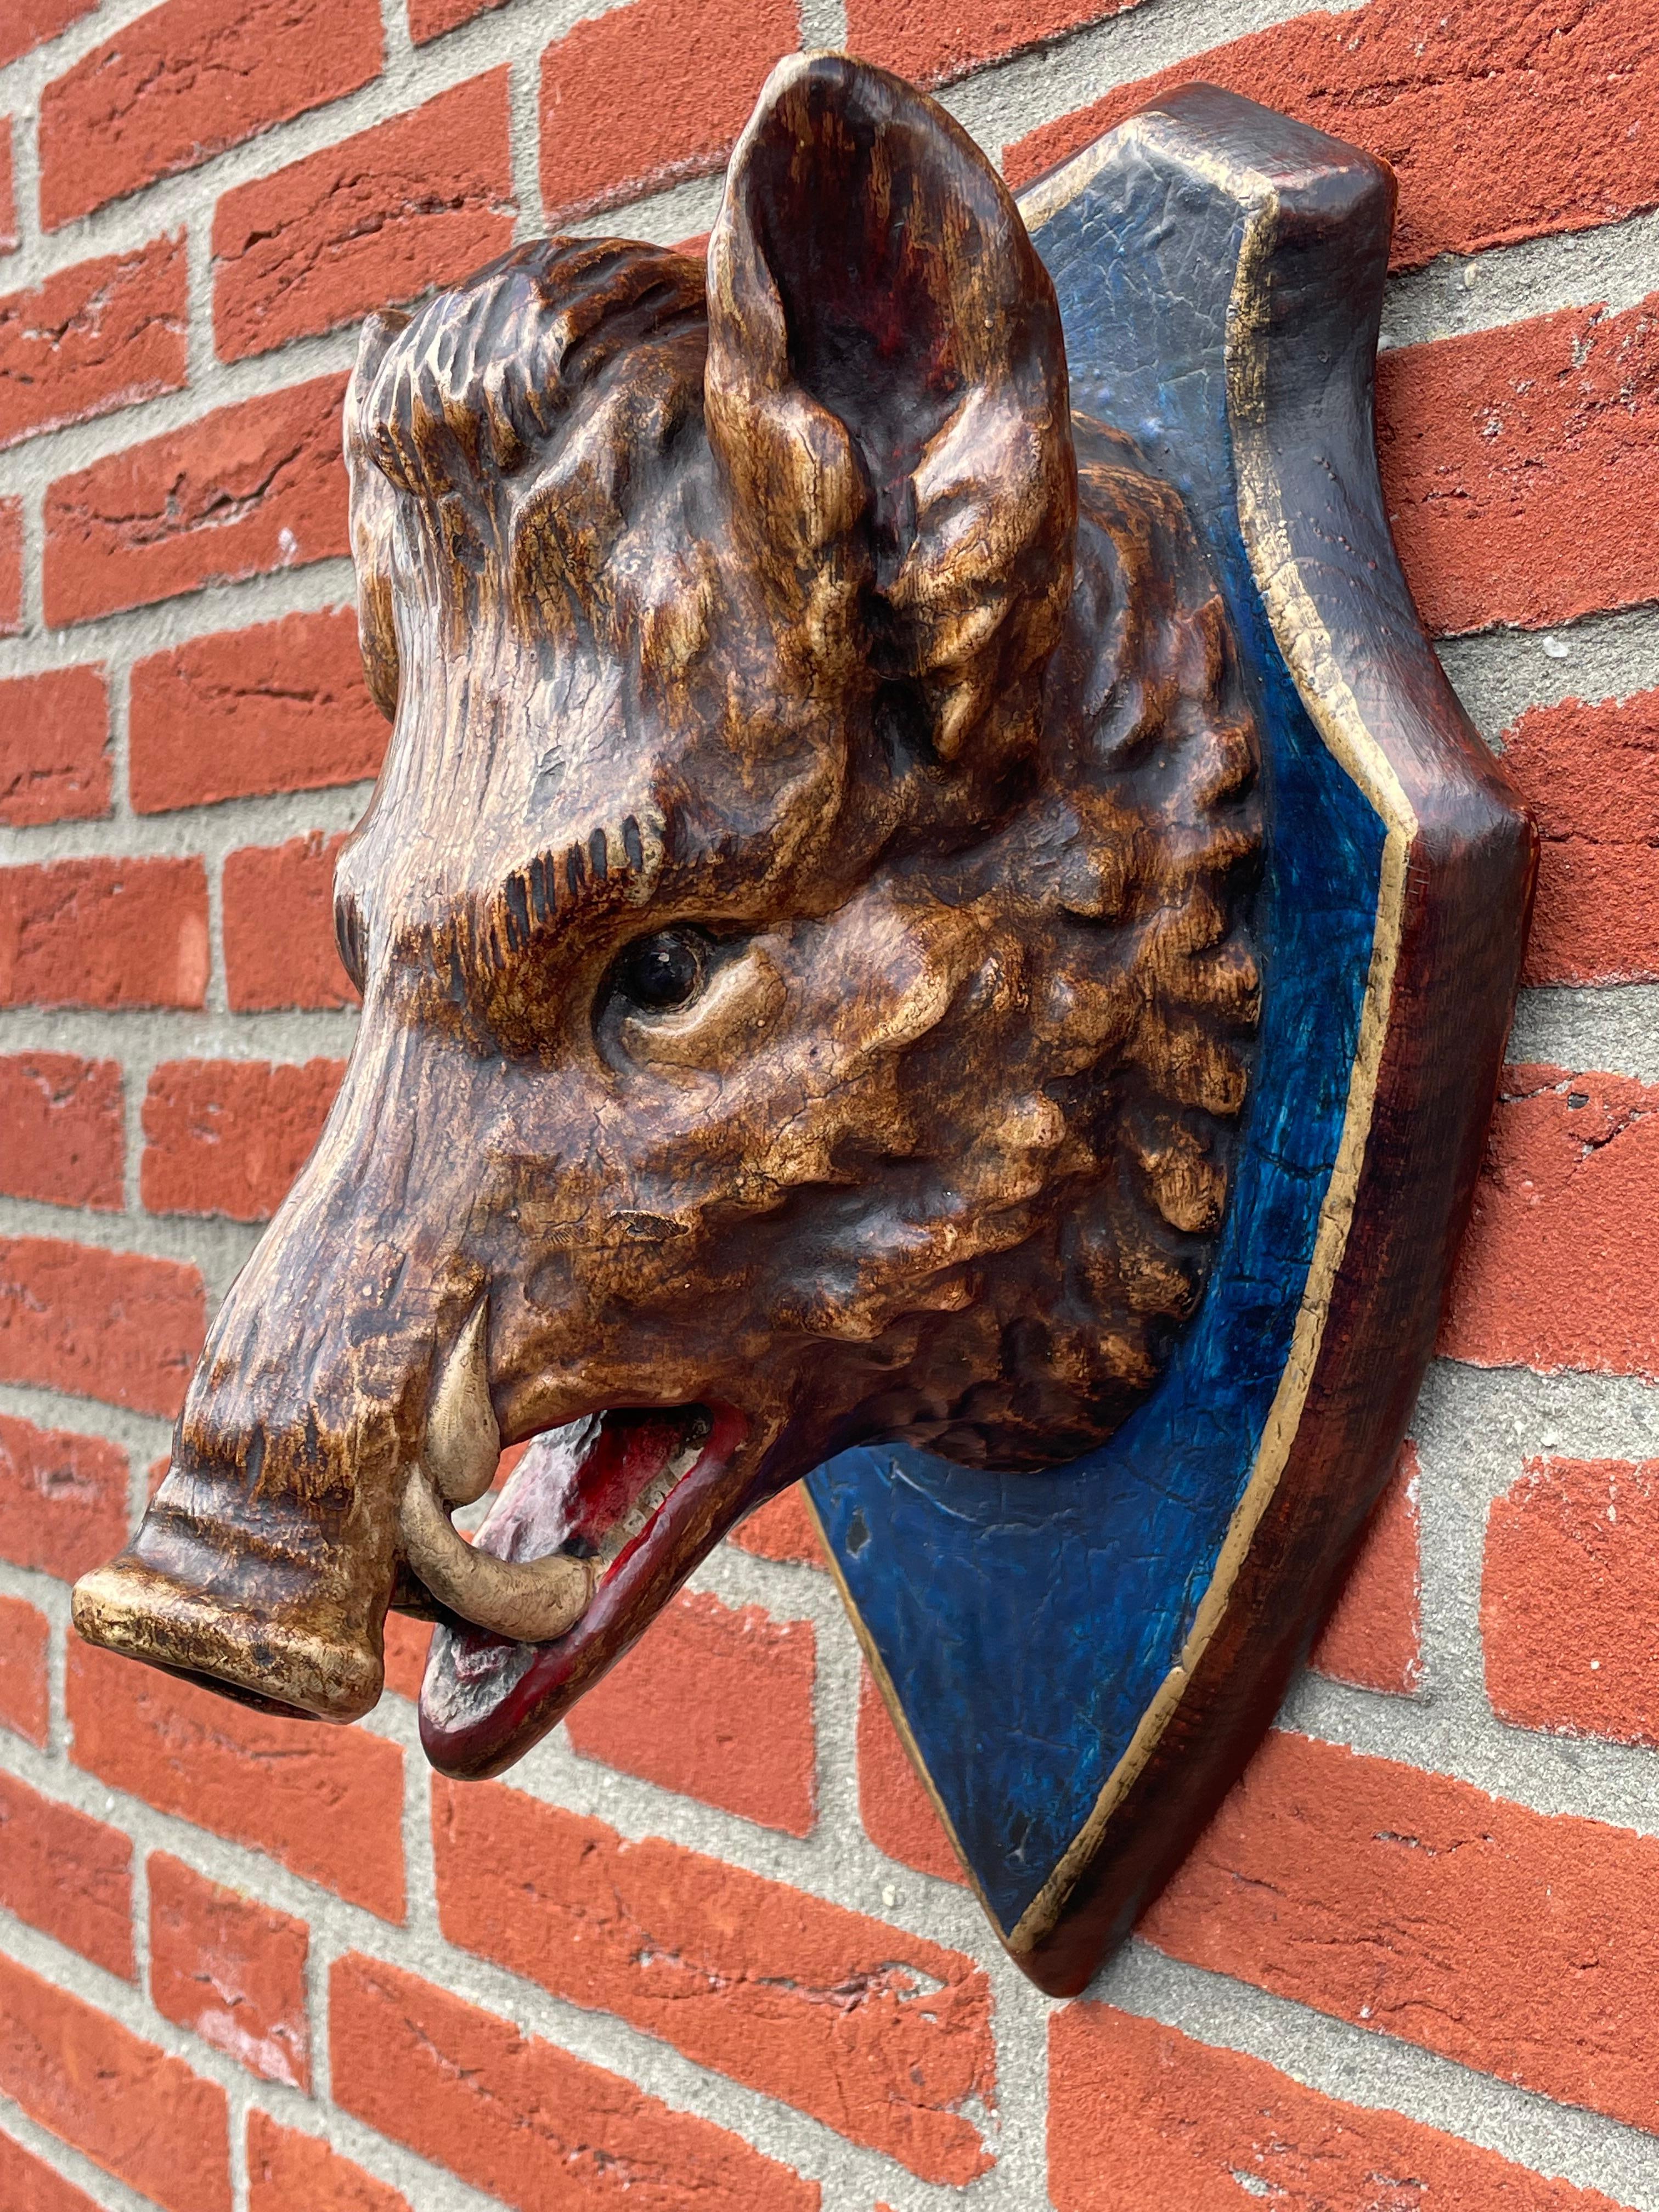 Amazing workmanship and mint Black Forest boar wall sculpture.

This perfect condition antique wooden sculpture of a wild hog on a wall plaque originates from the German Black Forest region and it was entirely hand-crafted in the mid to late 1800s.